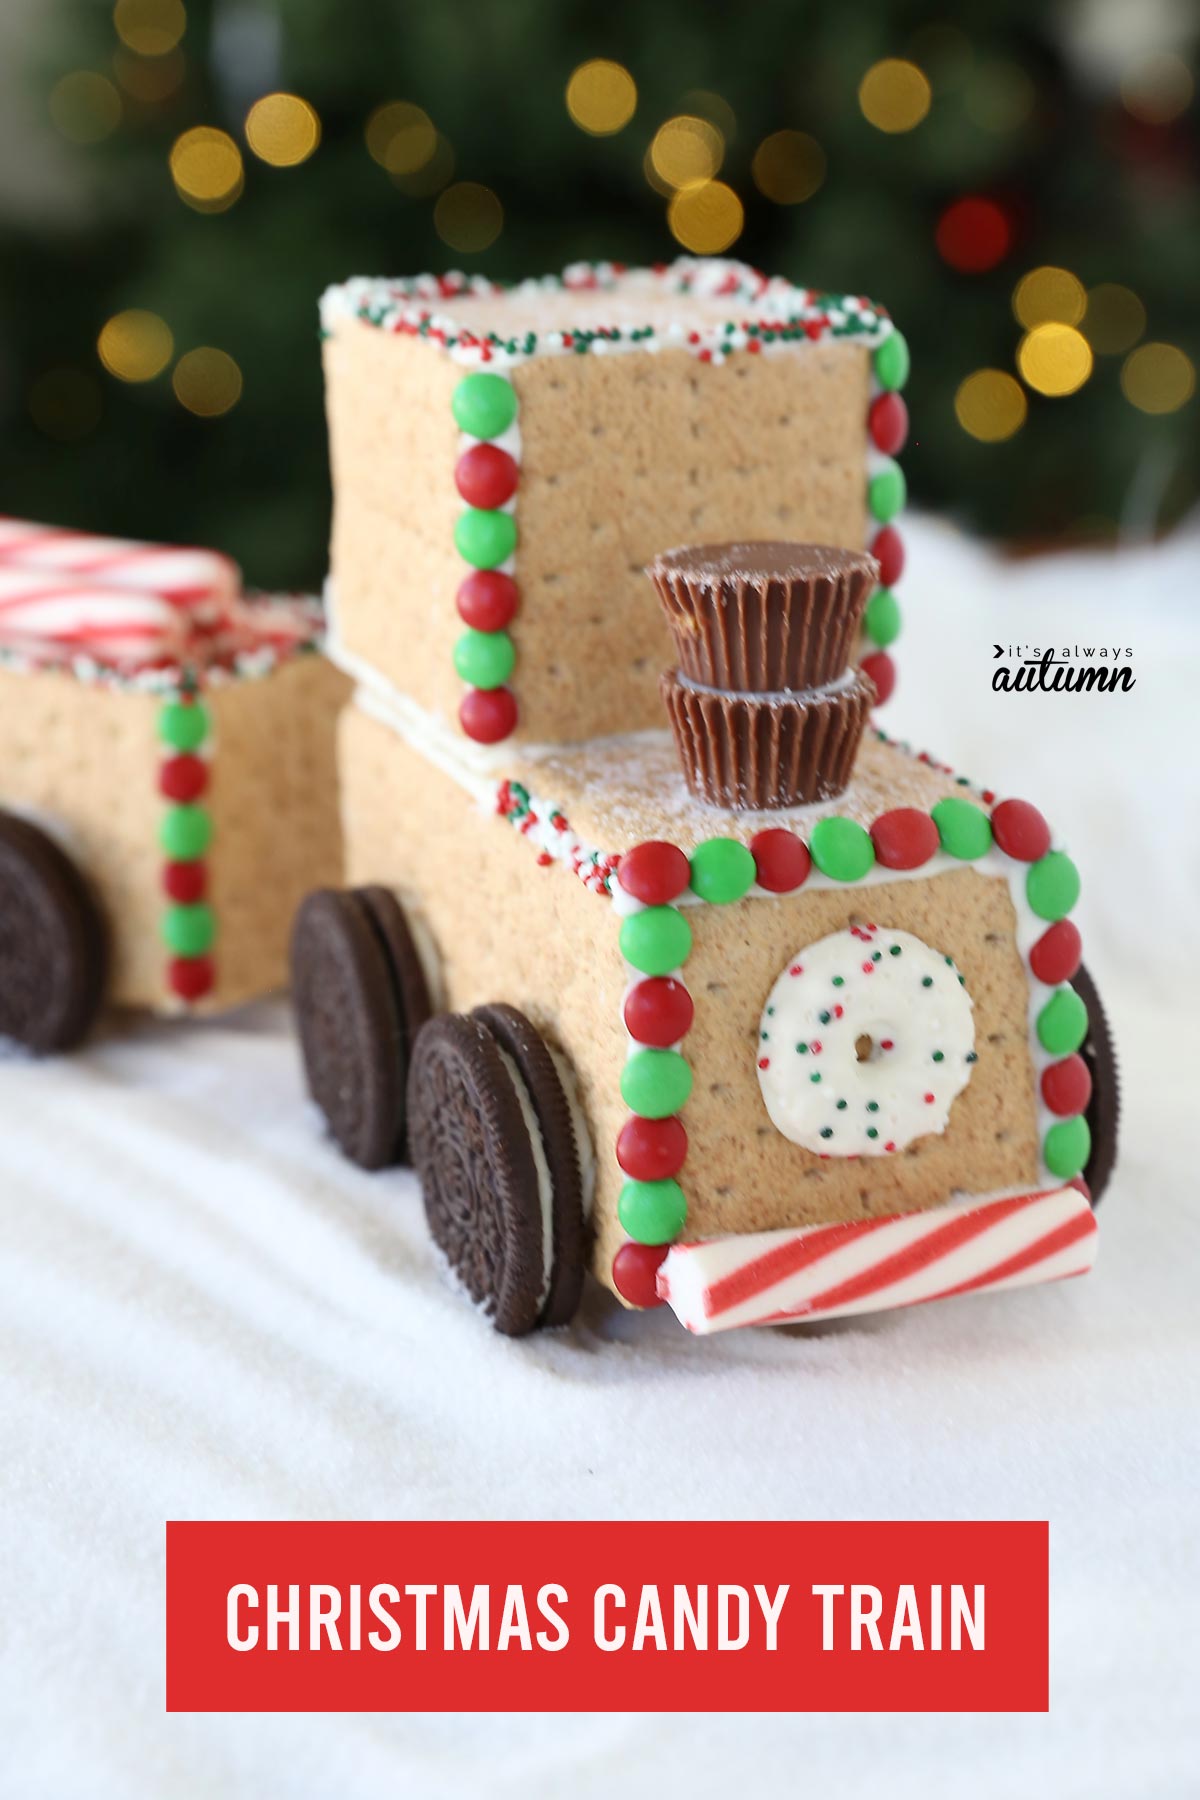 Candy train made from Graham crackers in front of a Christmas tree